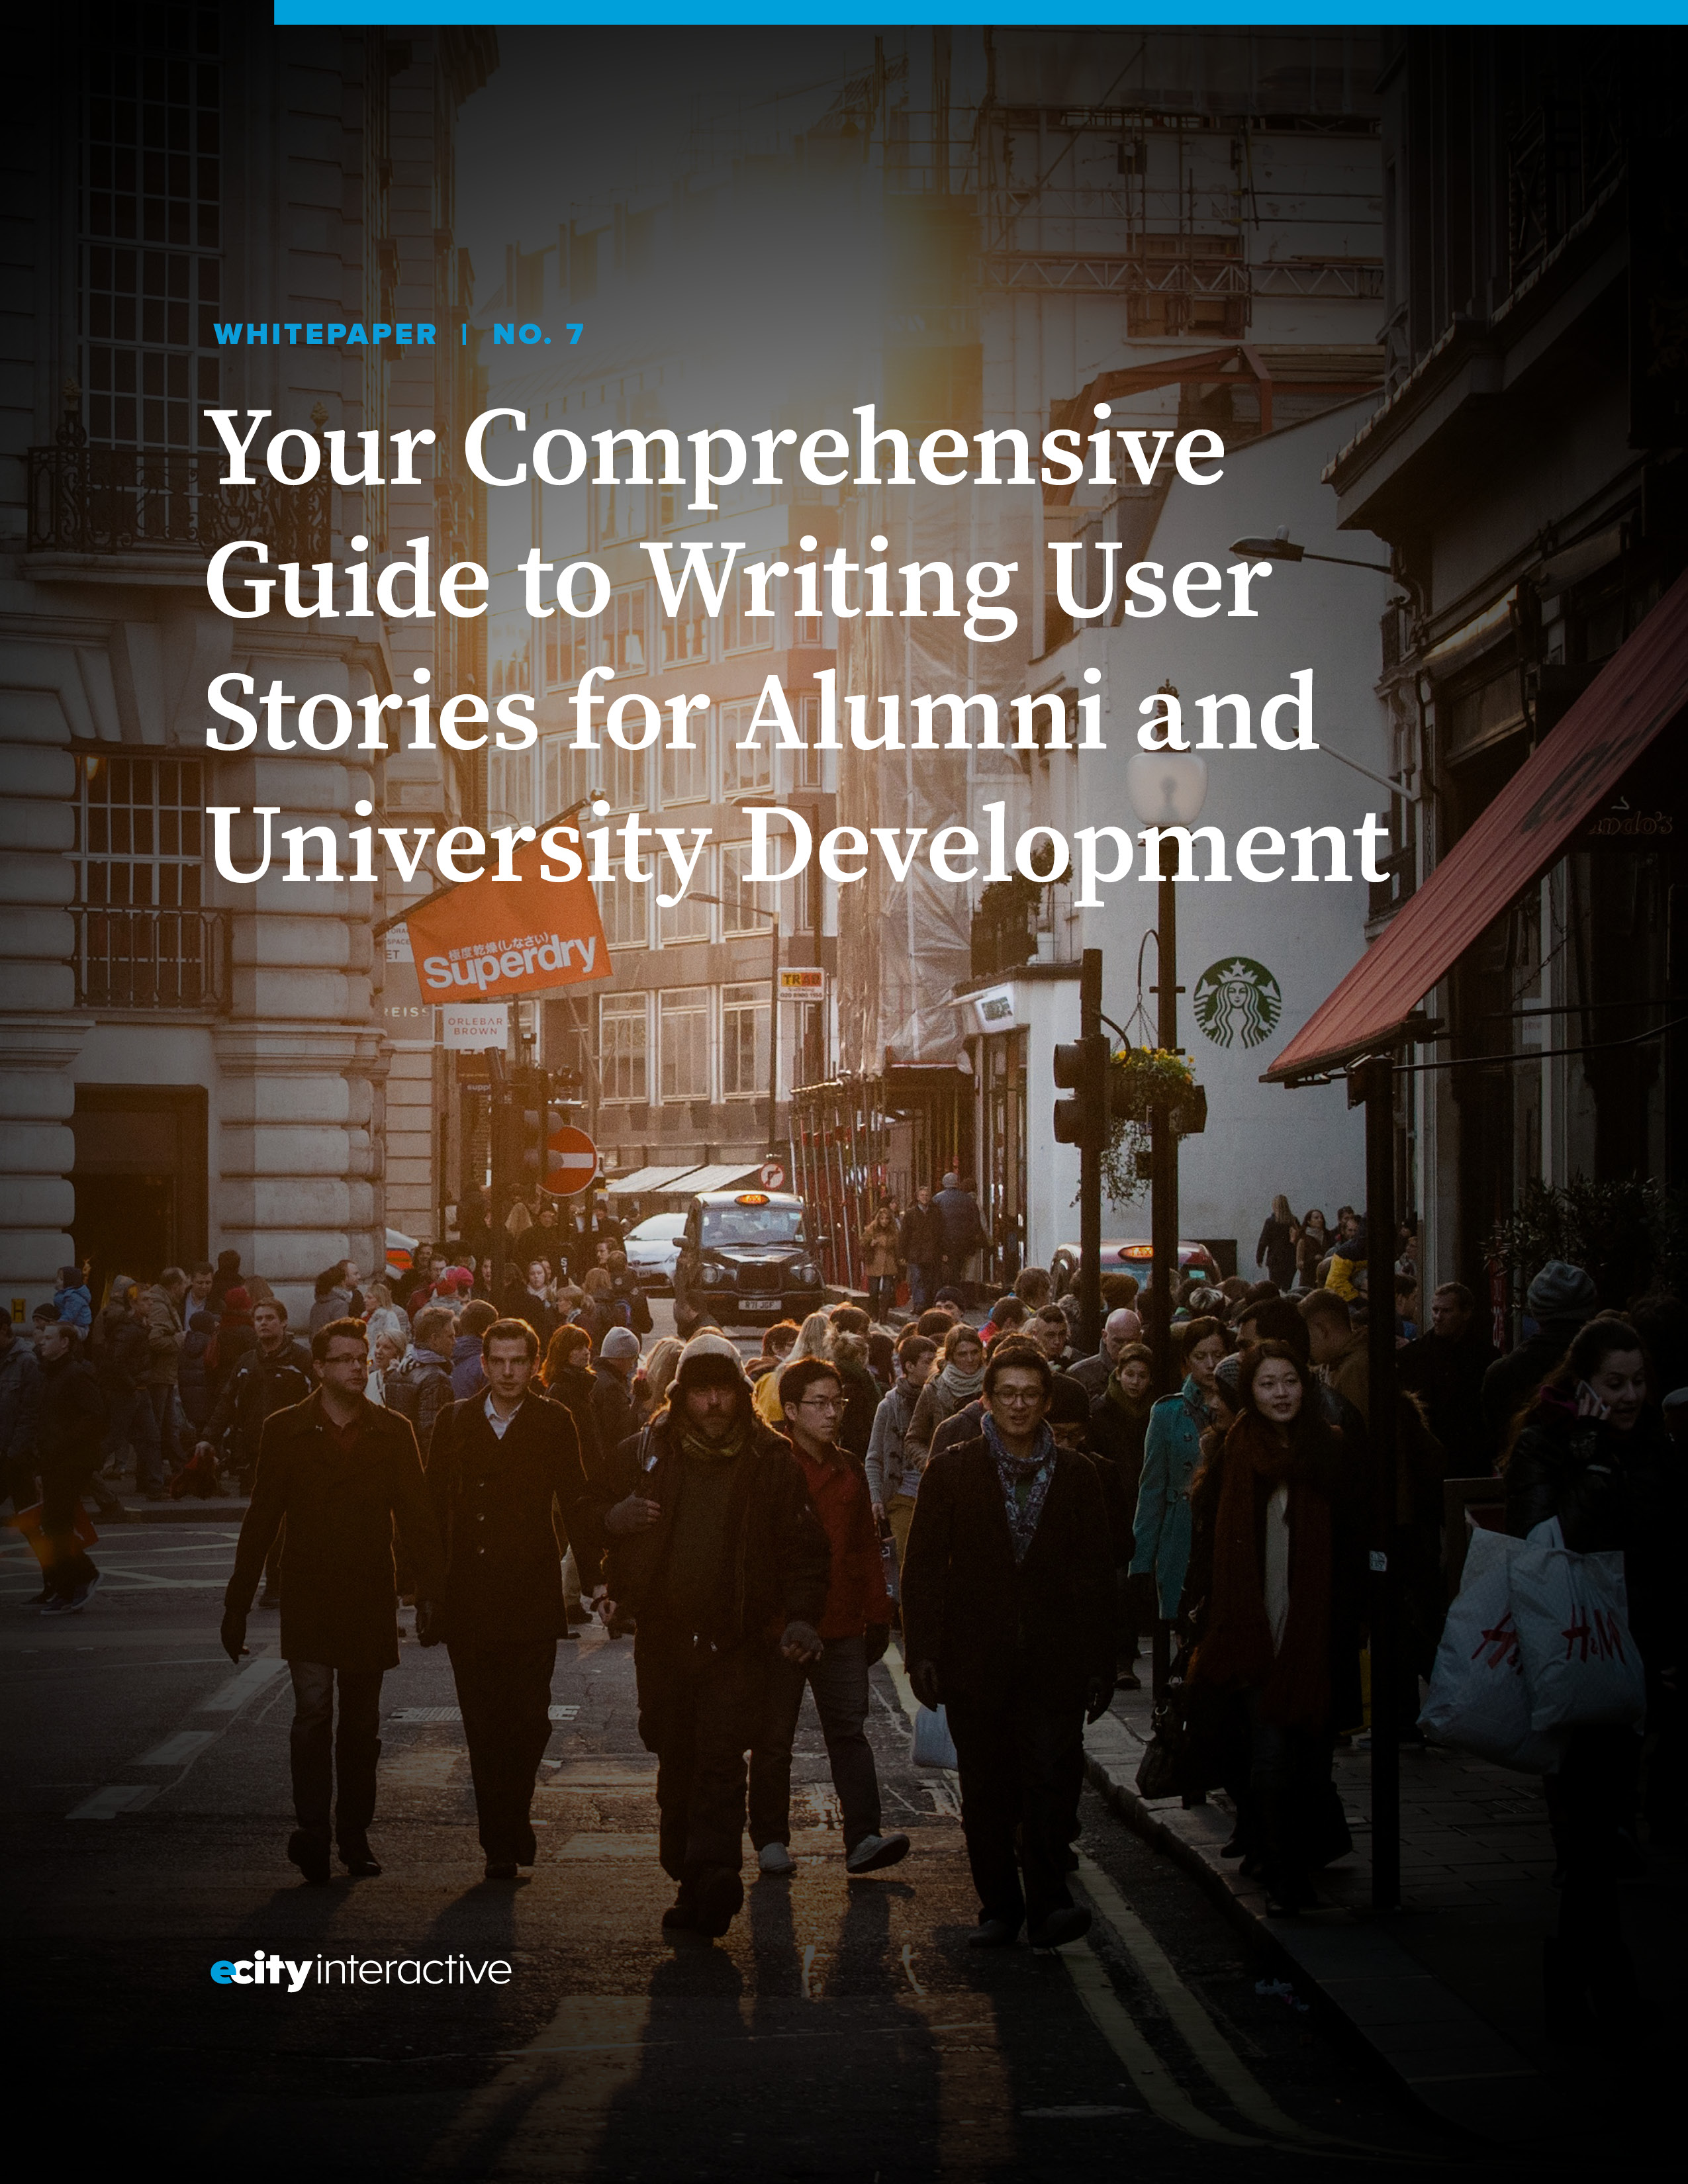 A photo of the Your Comprehensive Guide to Writing User Stories for Alumni and University Development white paper